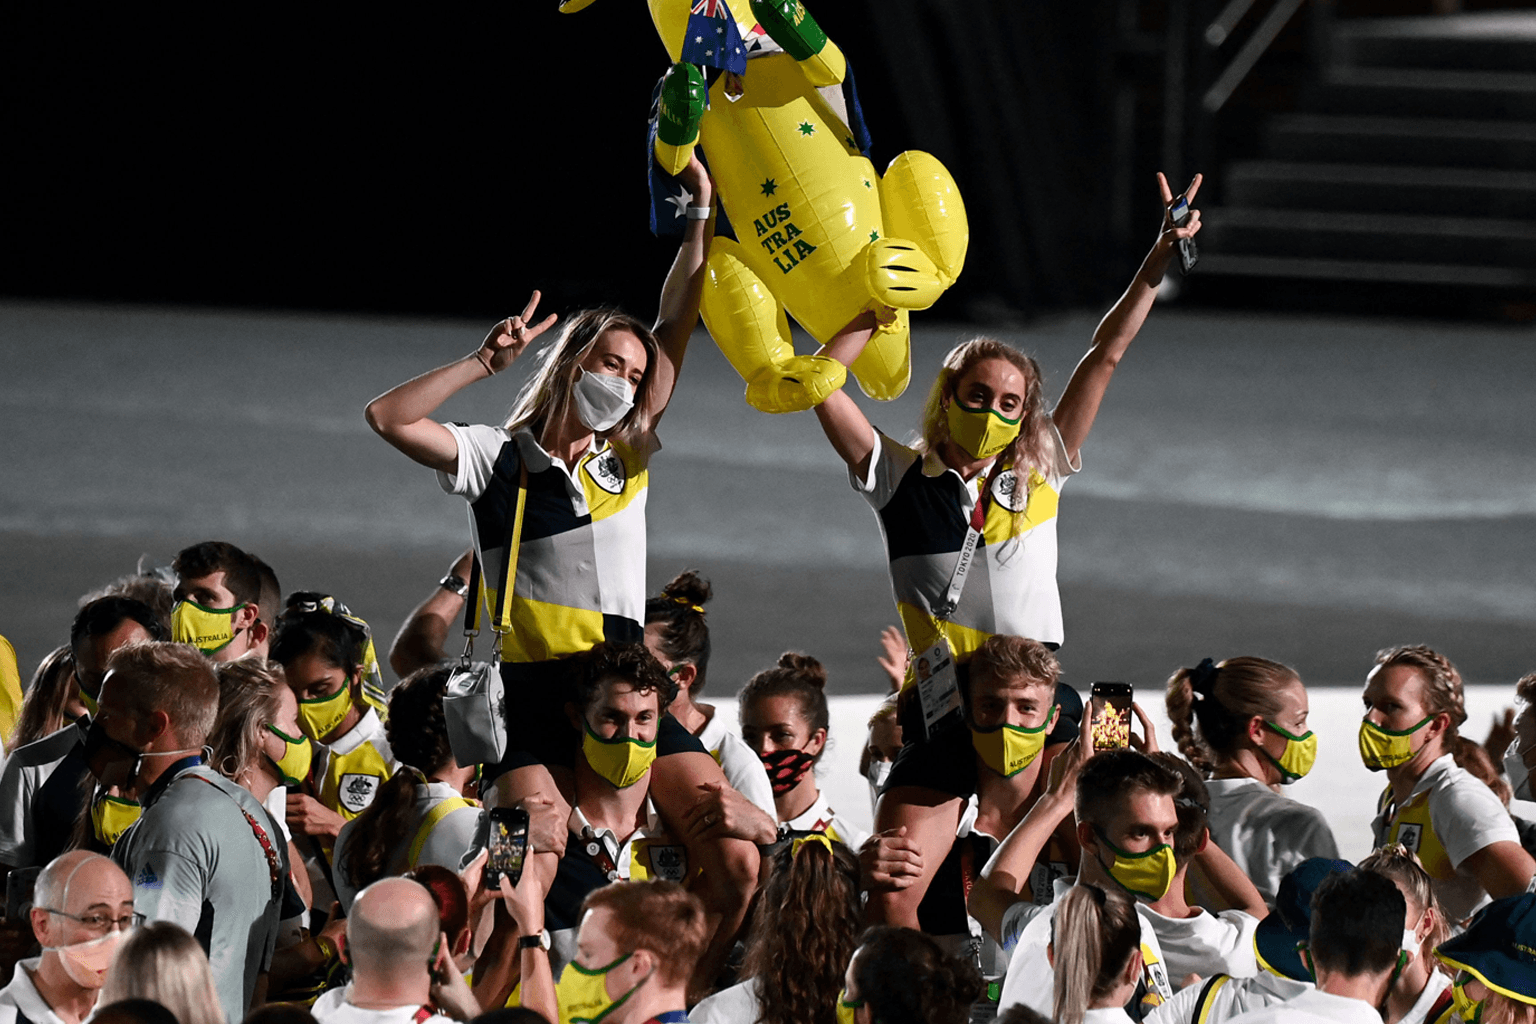 Australian athletes at the Tokyo 2020 Olympic Games closing ceremony, including two young women sitting on male athlete's shoulders, holding an inflatable boxing Kangaroo and making peace signs.